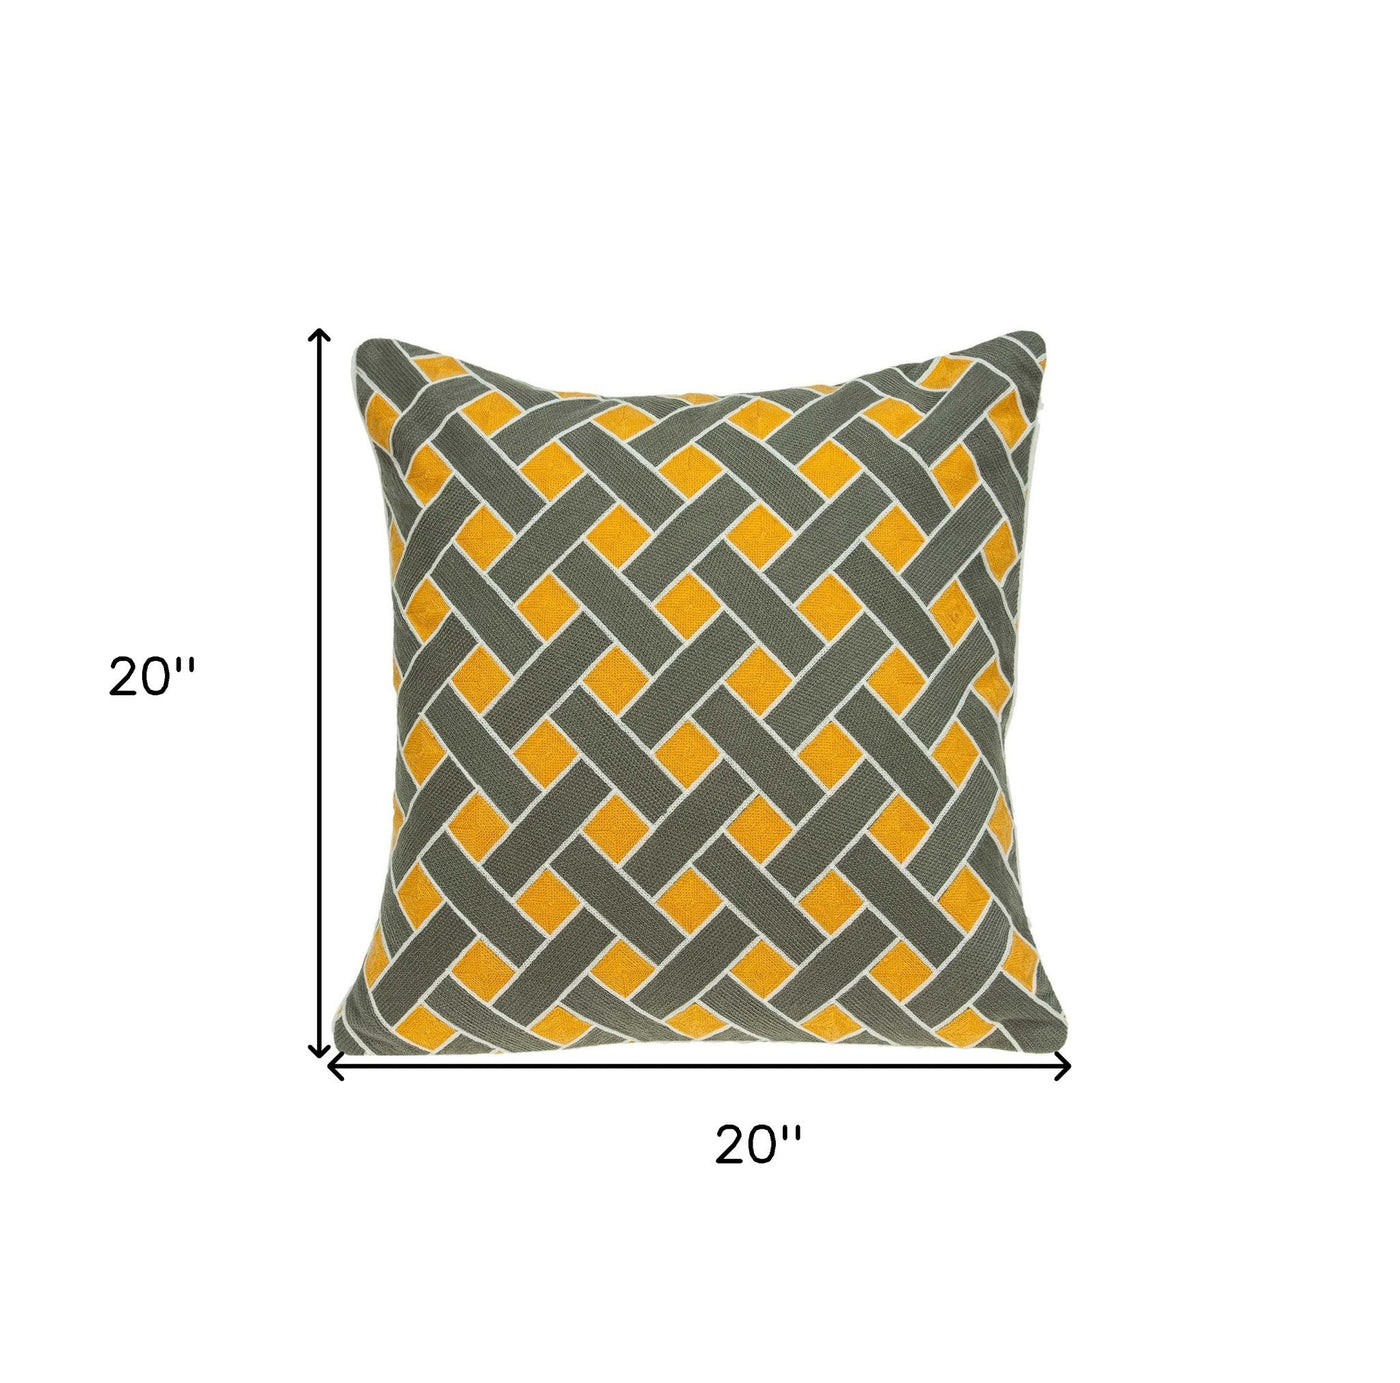 20’ X 7’ X 20’ Transitional Gray And Orange Pillow Cover With Poly Insert - Accent Throw Pillows